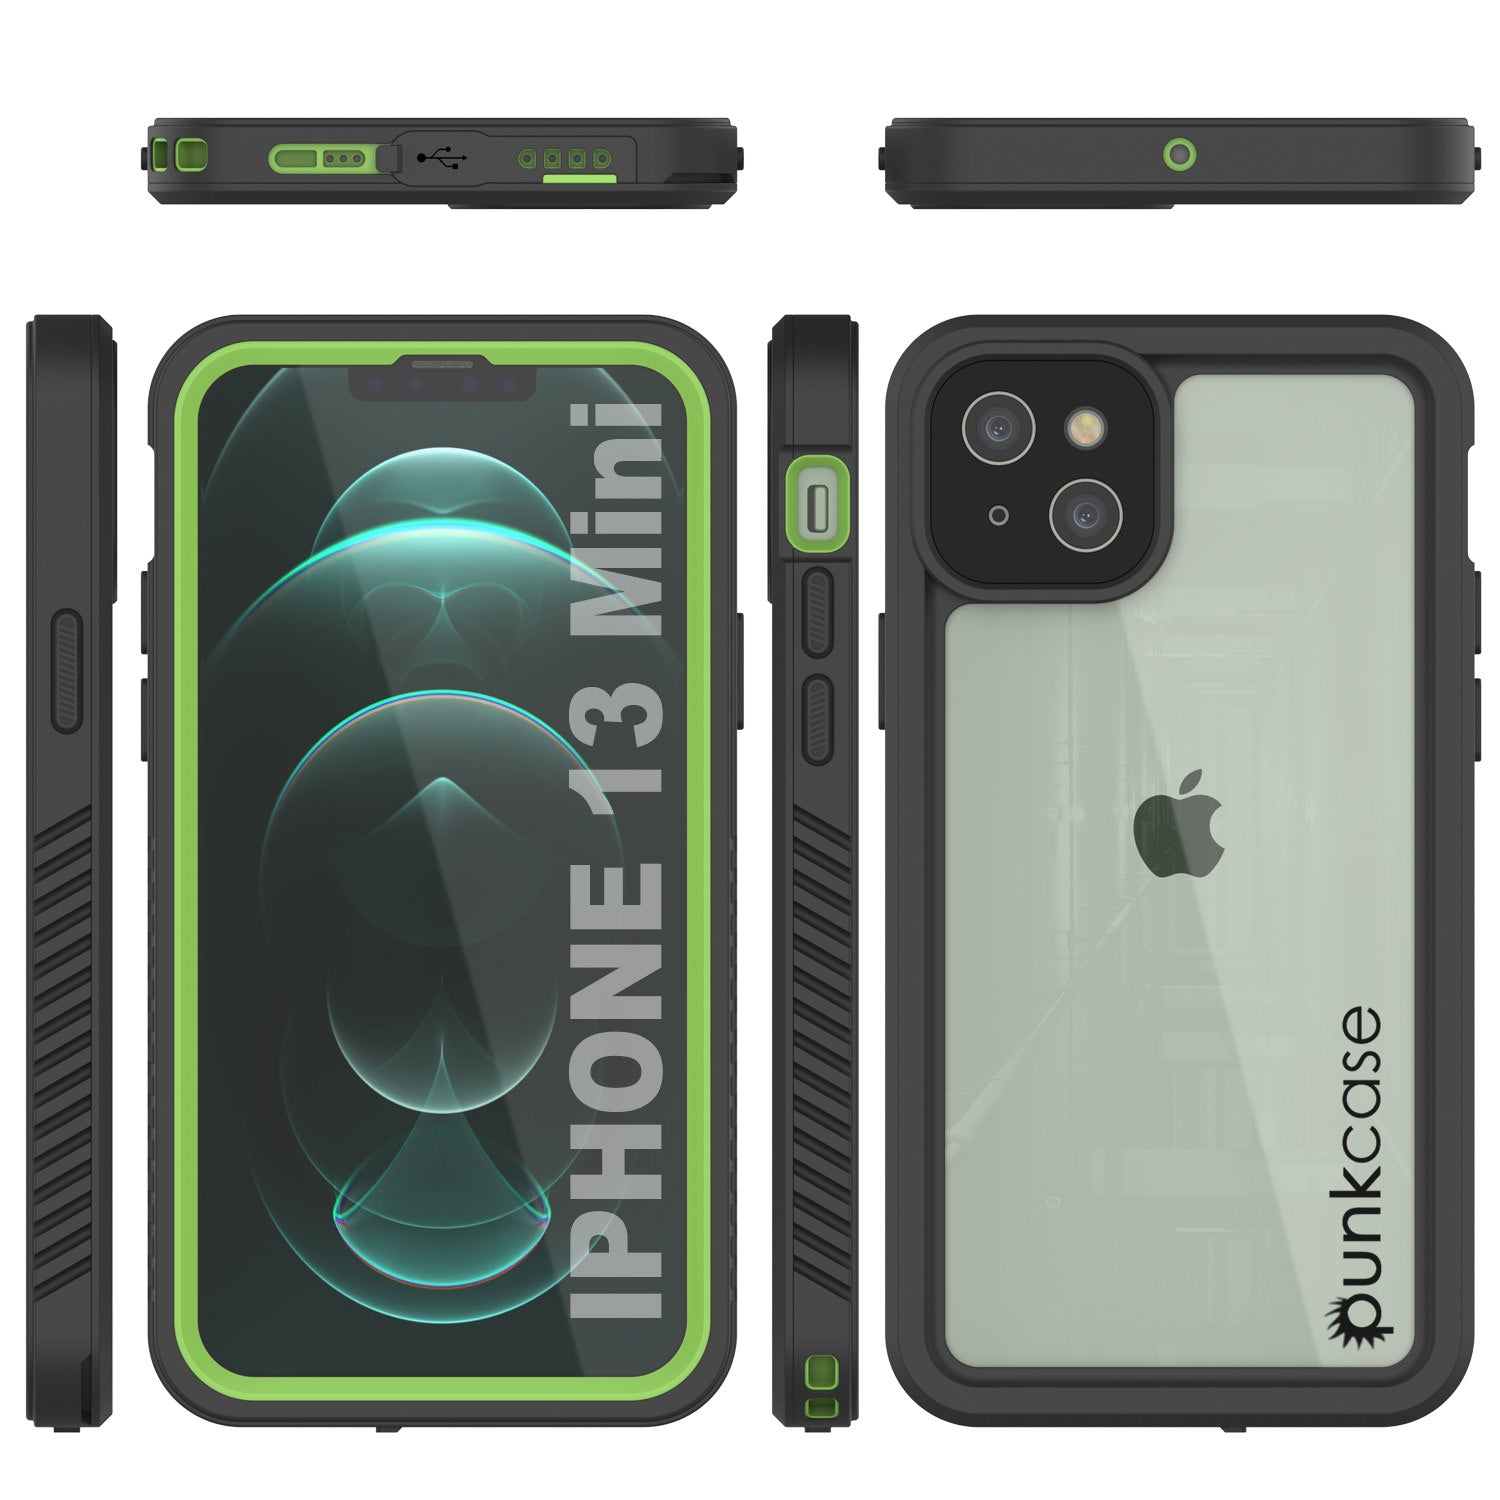 iPhone 13 Mini  Waterproof Case, Punkcase [Extreme Series] Armor Cover W/ Built In Screen Protector [Light Green]